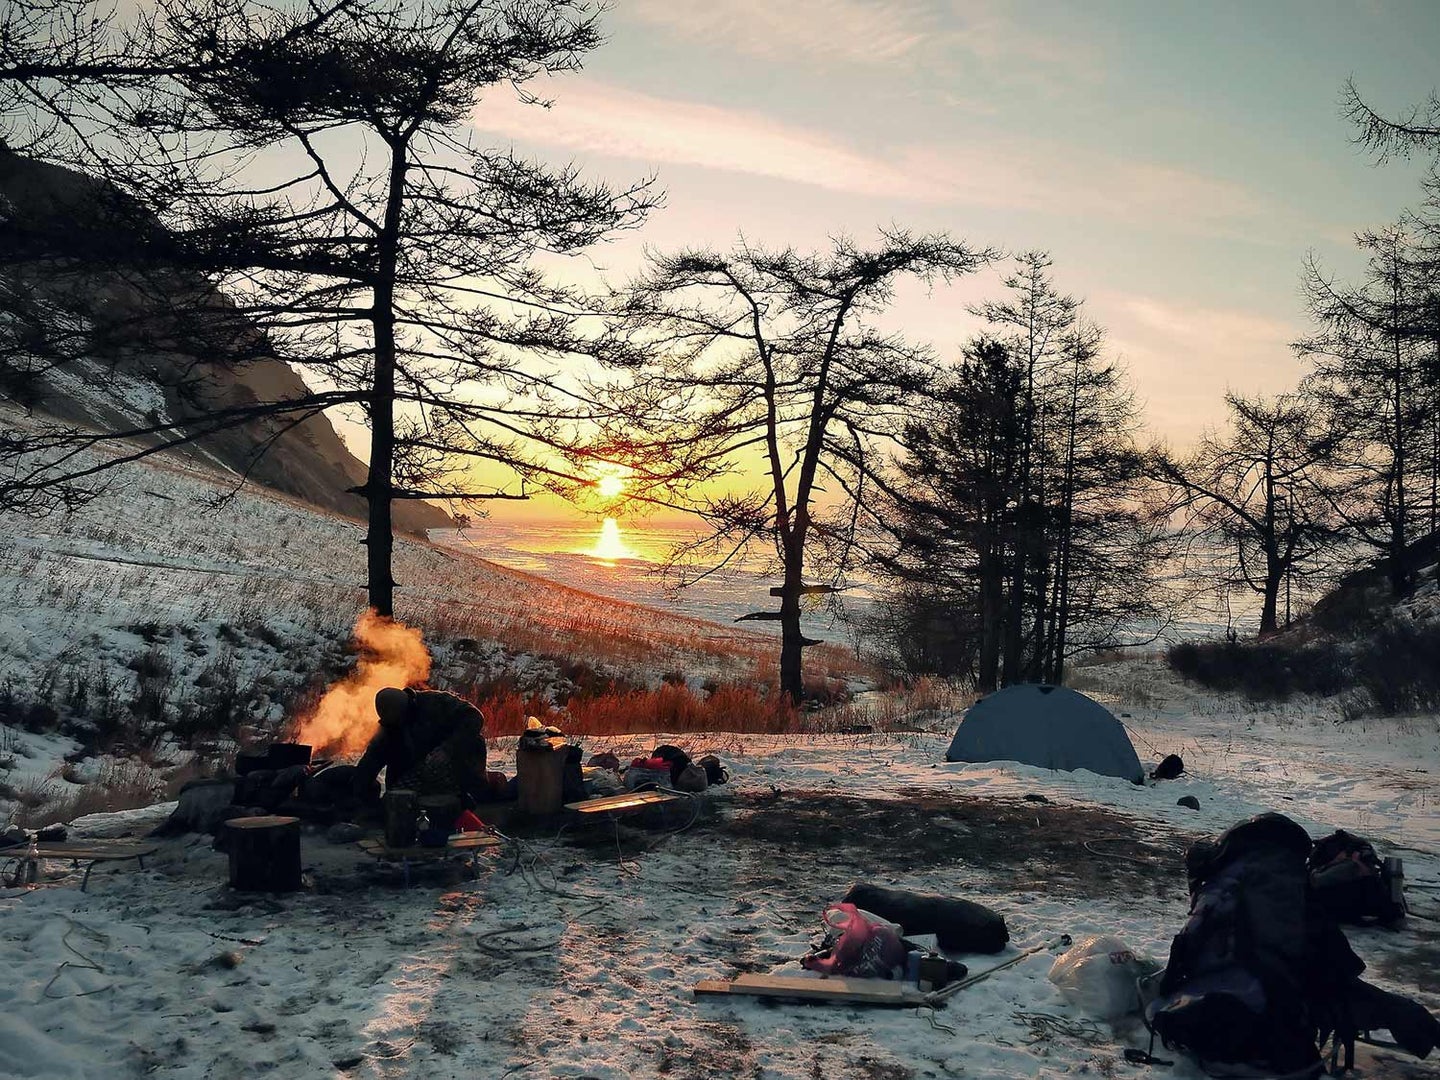 A wintry landscape with a small campsite and burning fire.